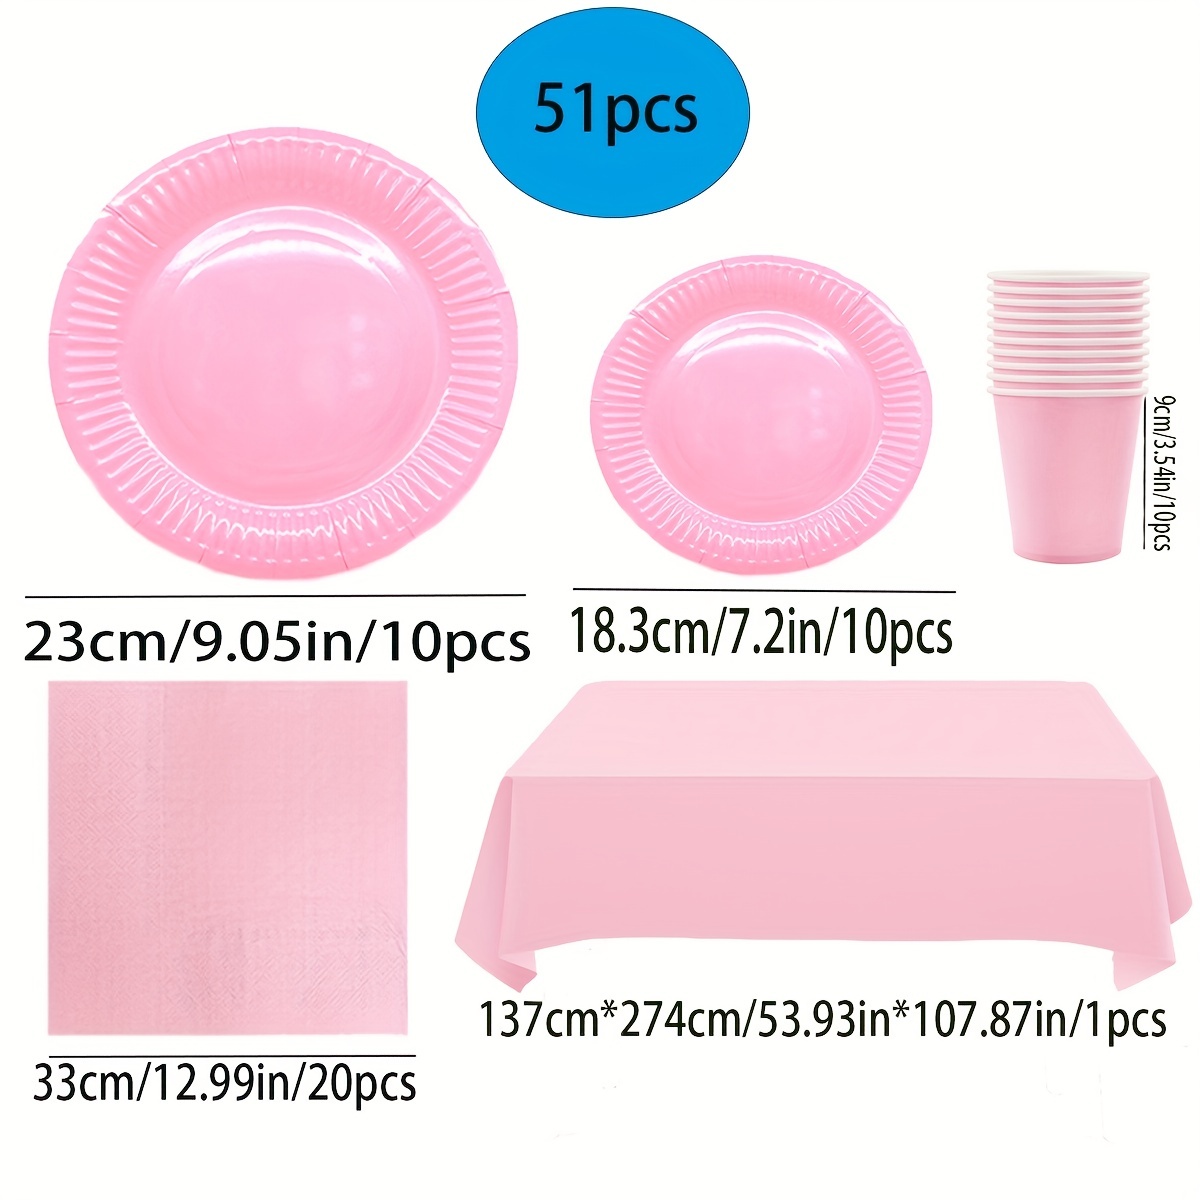 Baby Shower Tableware Plates and Napkins, Baby Girl Decorations | 25 Servings with Rose Gold Foil, Pink Floral Paper Dessert Disposable Cups | Tea